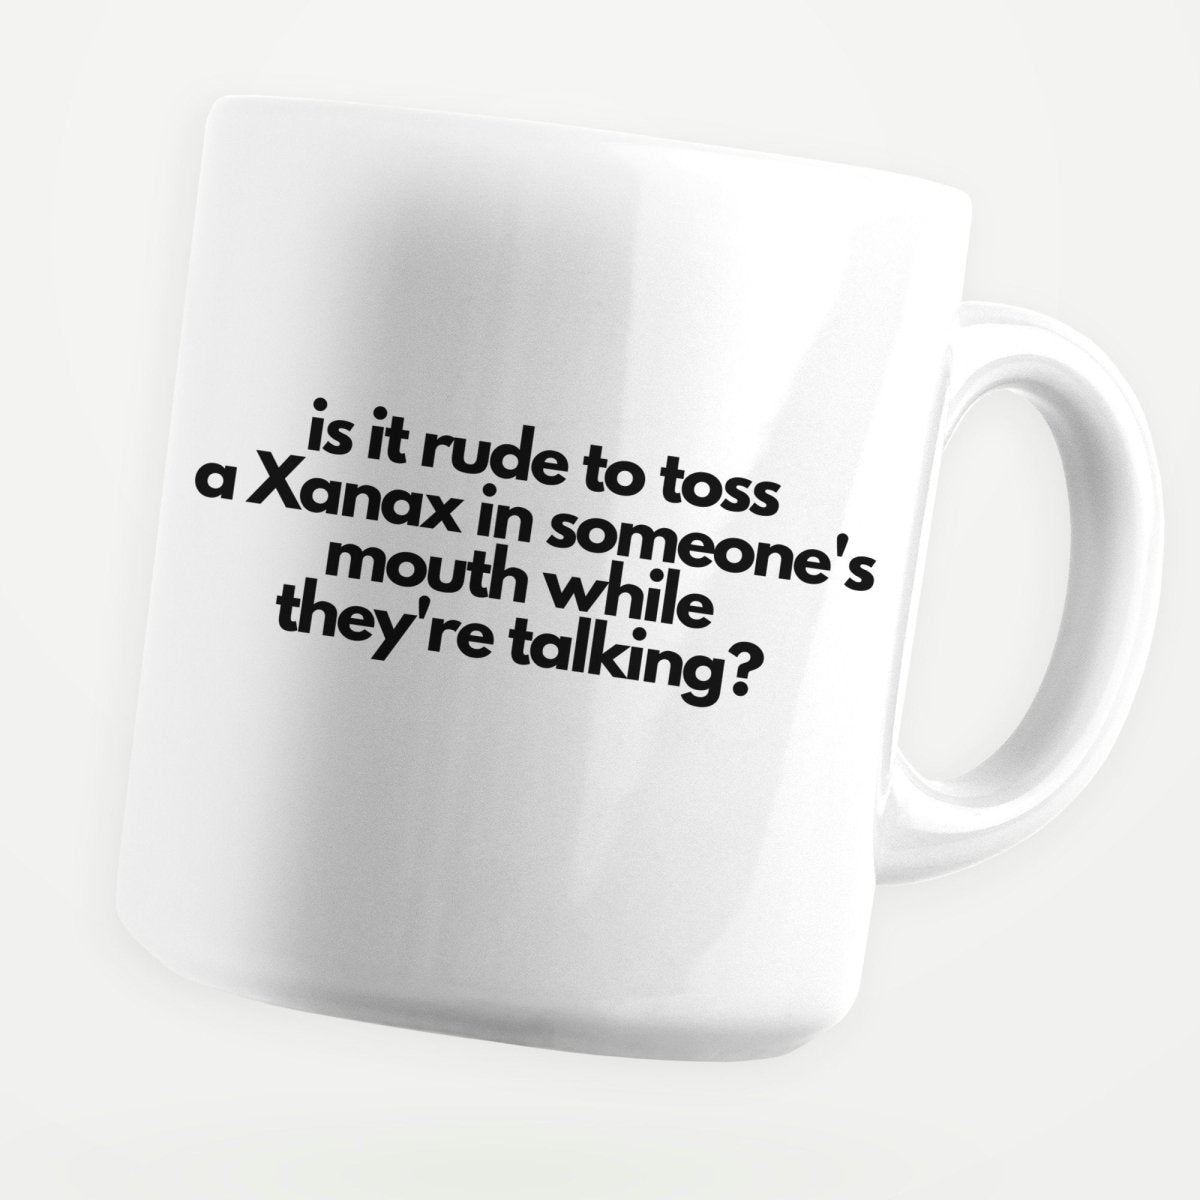 Is It Rude To Toss Xanax In Someone's Mouth 11oz Coffee Mug - stickerbullIs It Rude To Toss Xanax In Someone's Mouth 11oz Coffee MugMugsstickerbullstickerbullMug_IsItRudeToTossXanaxInSomeone'sMouthIs It Rude To Toss Xanax In Someone's Mouth 11oz Coffee Mug